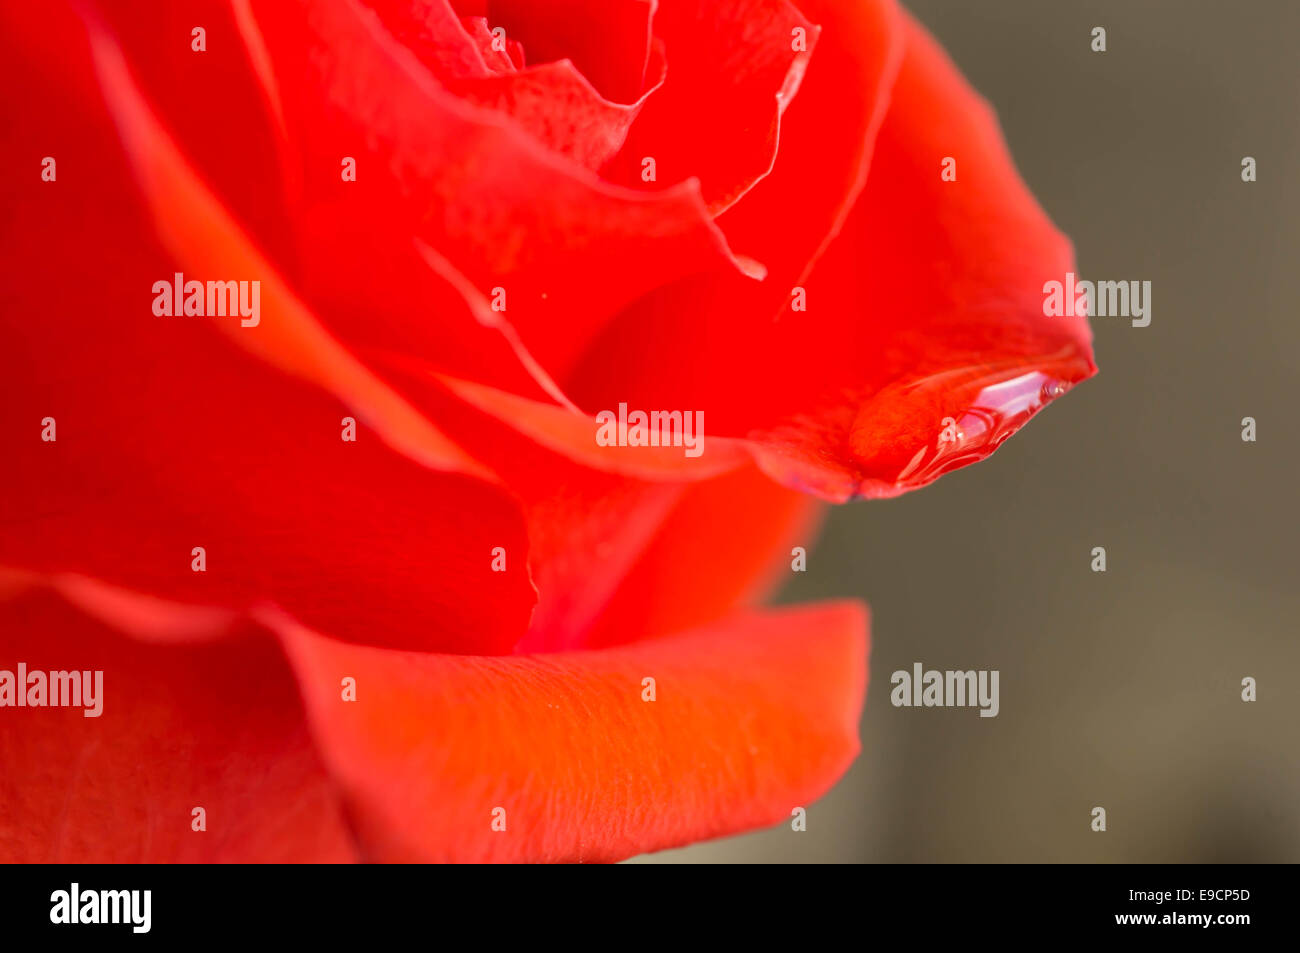 Petals of a red rose with a water drop close up Stock Photo